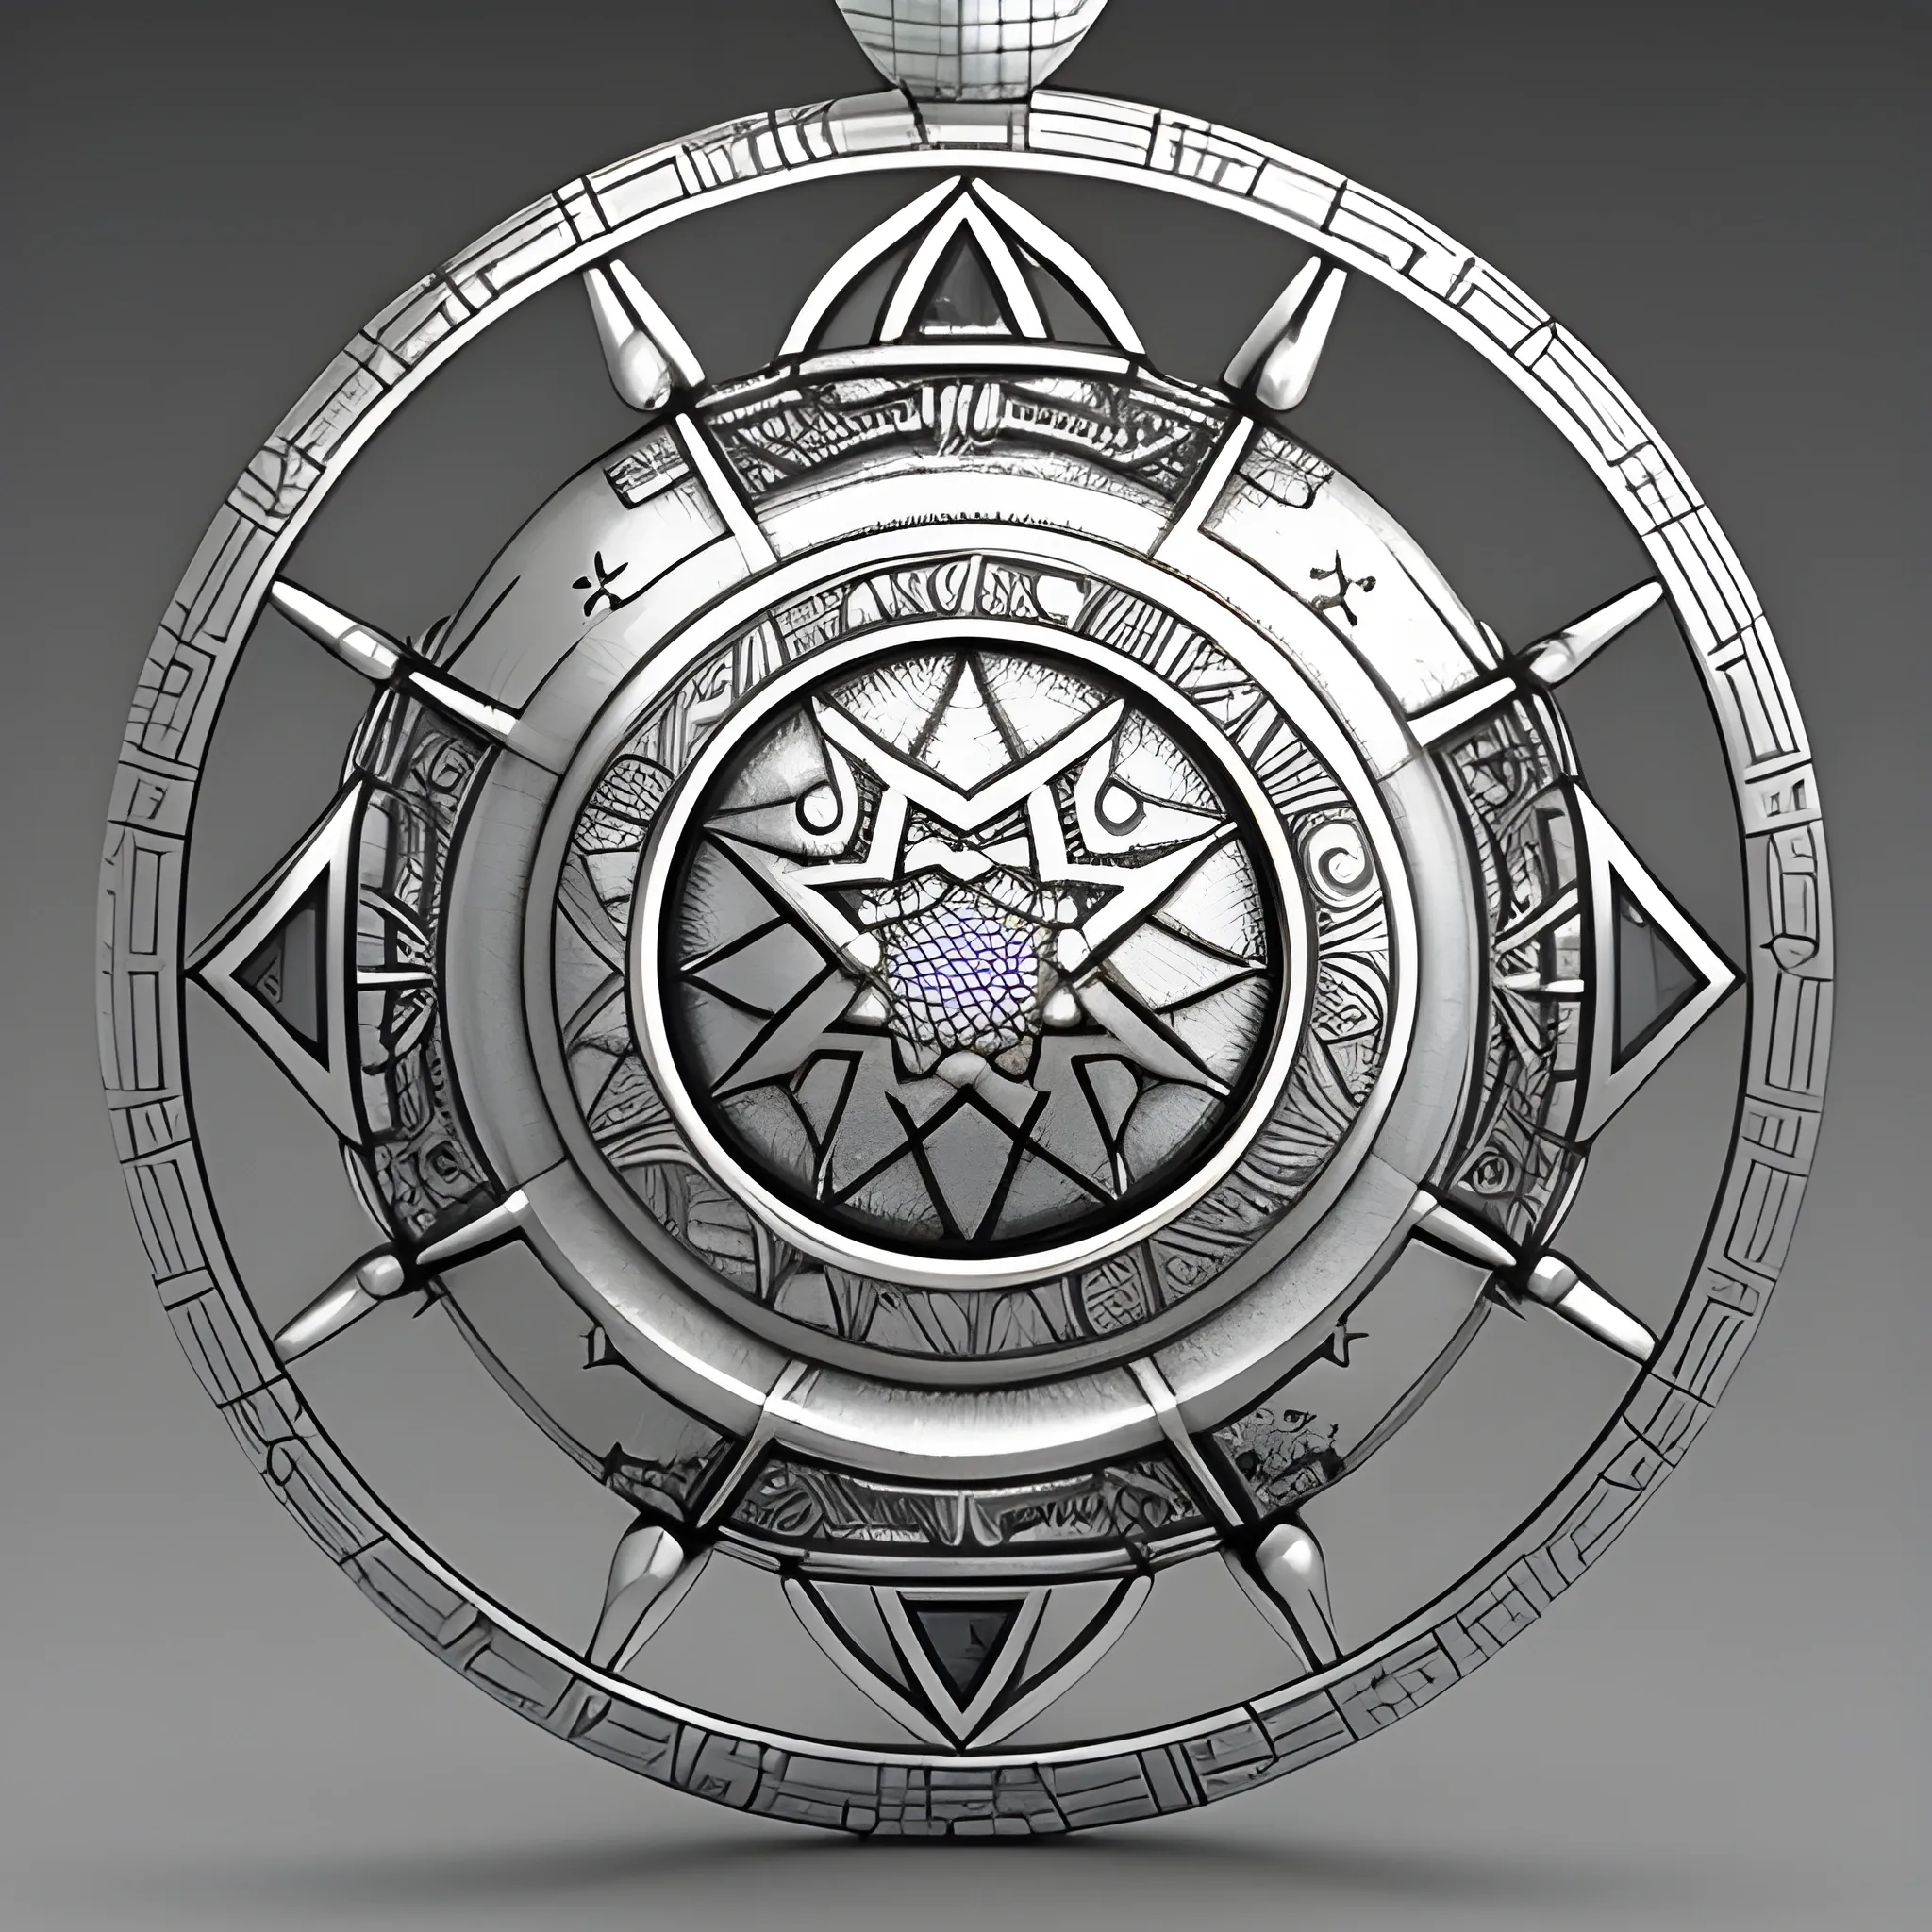 Can you make an AI design of a silver amulet bestowed by a goddess of the moon, stars, and magic, 3D?
